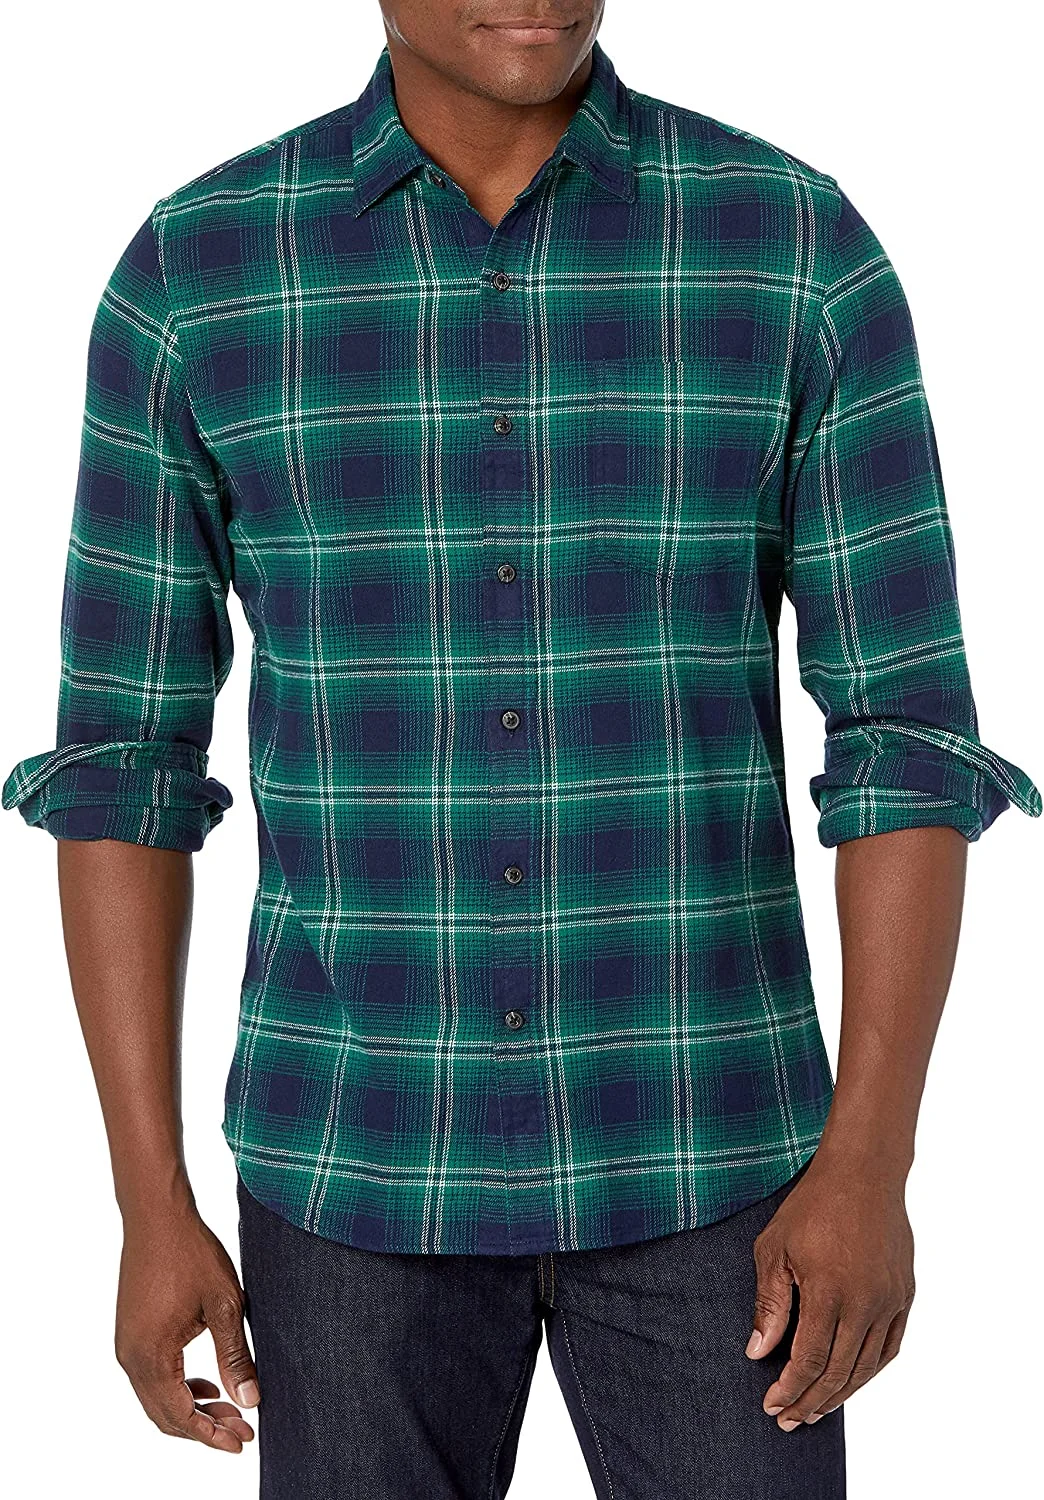 Men Slim Fit Long Sleeve Flannel Shirt from Bangladesh factory